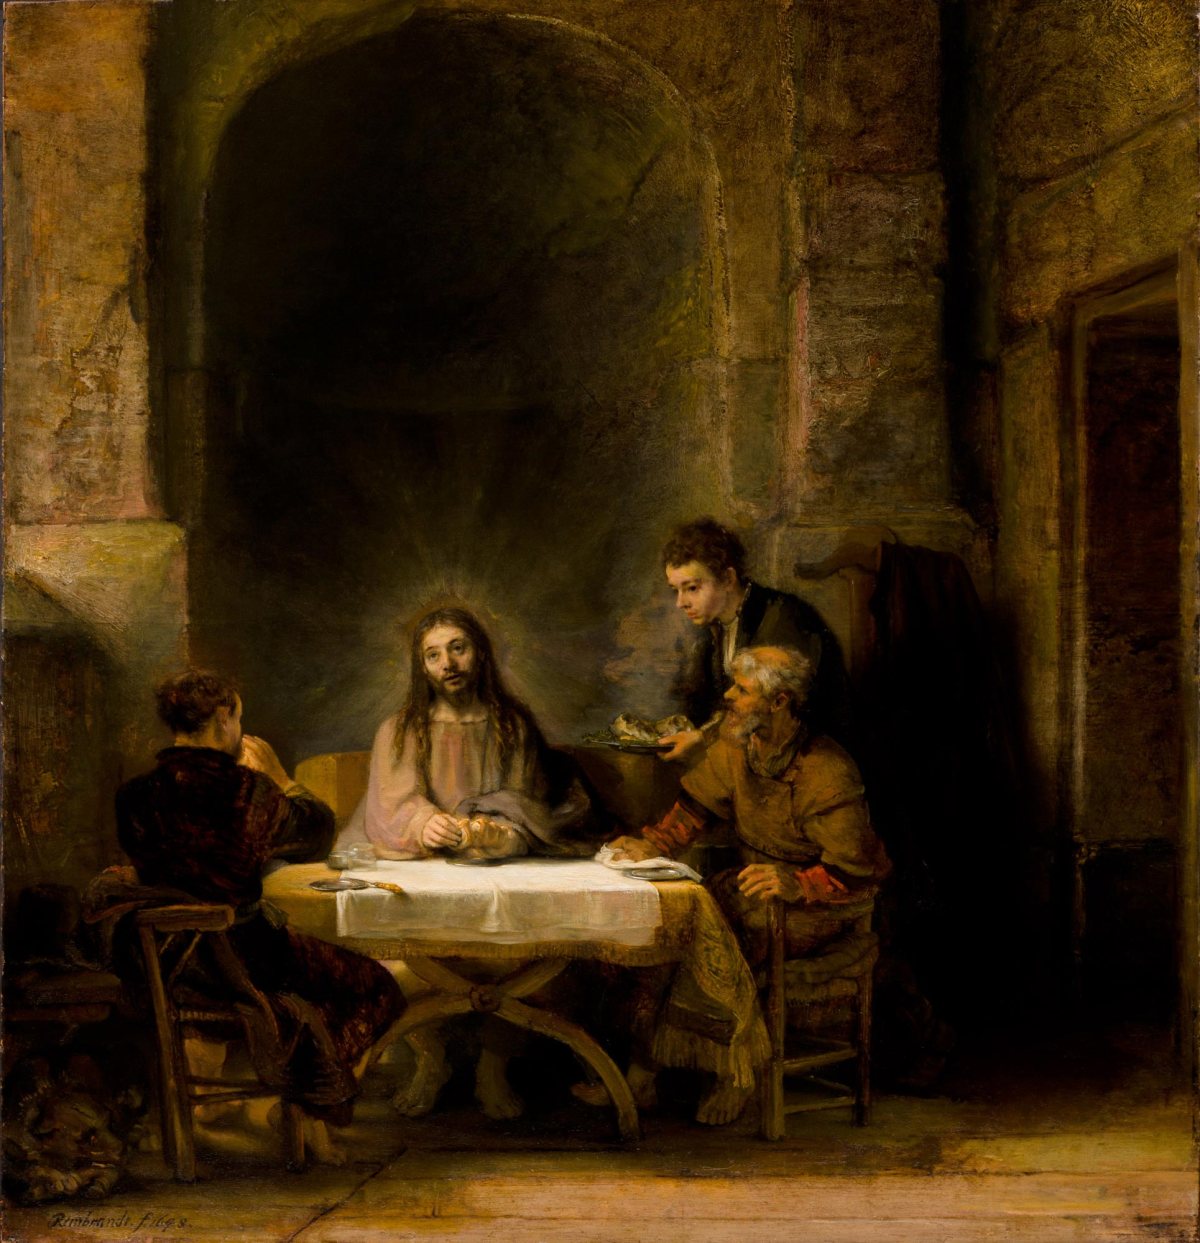 Holy Week Poetry 2016, Maundy Thursday: “Love (III)” by George Herbert